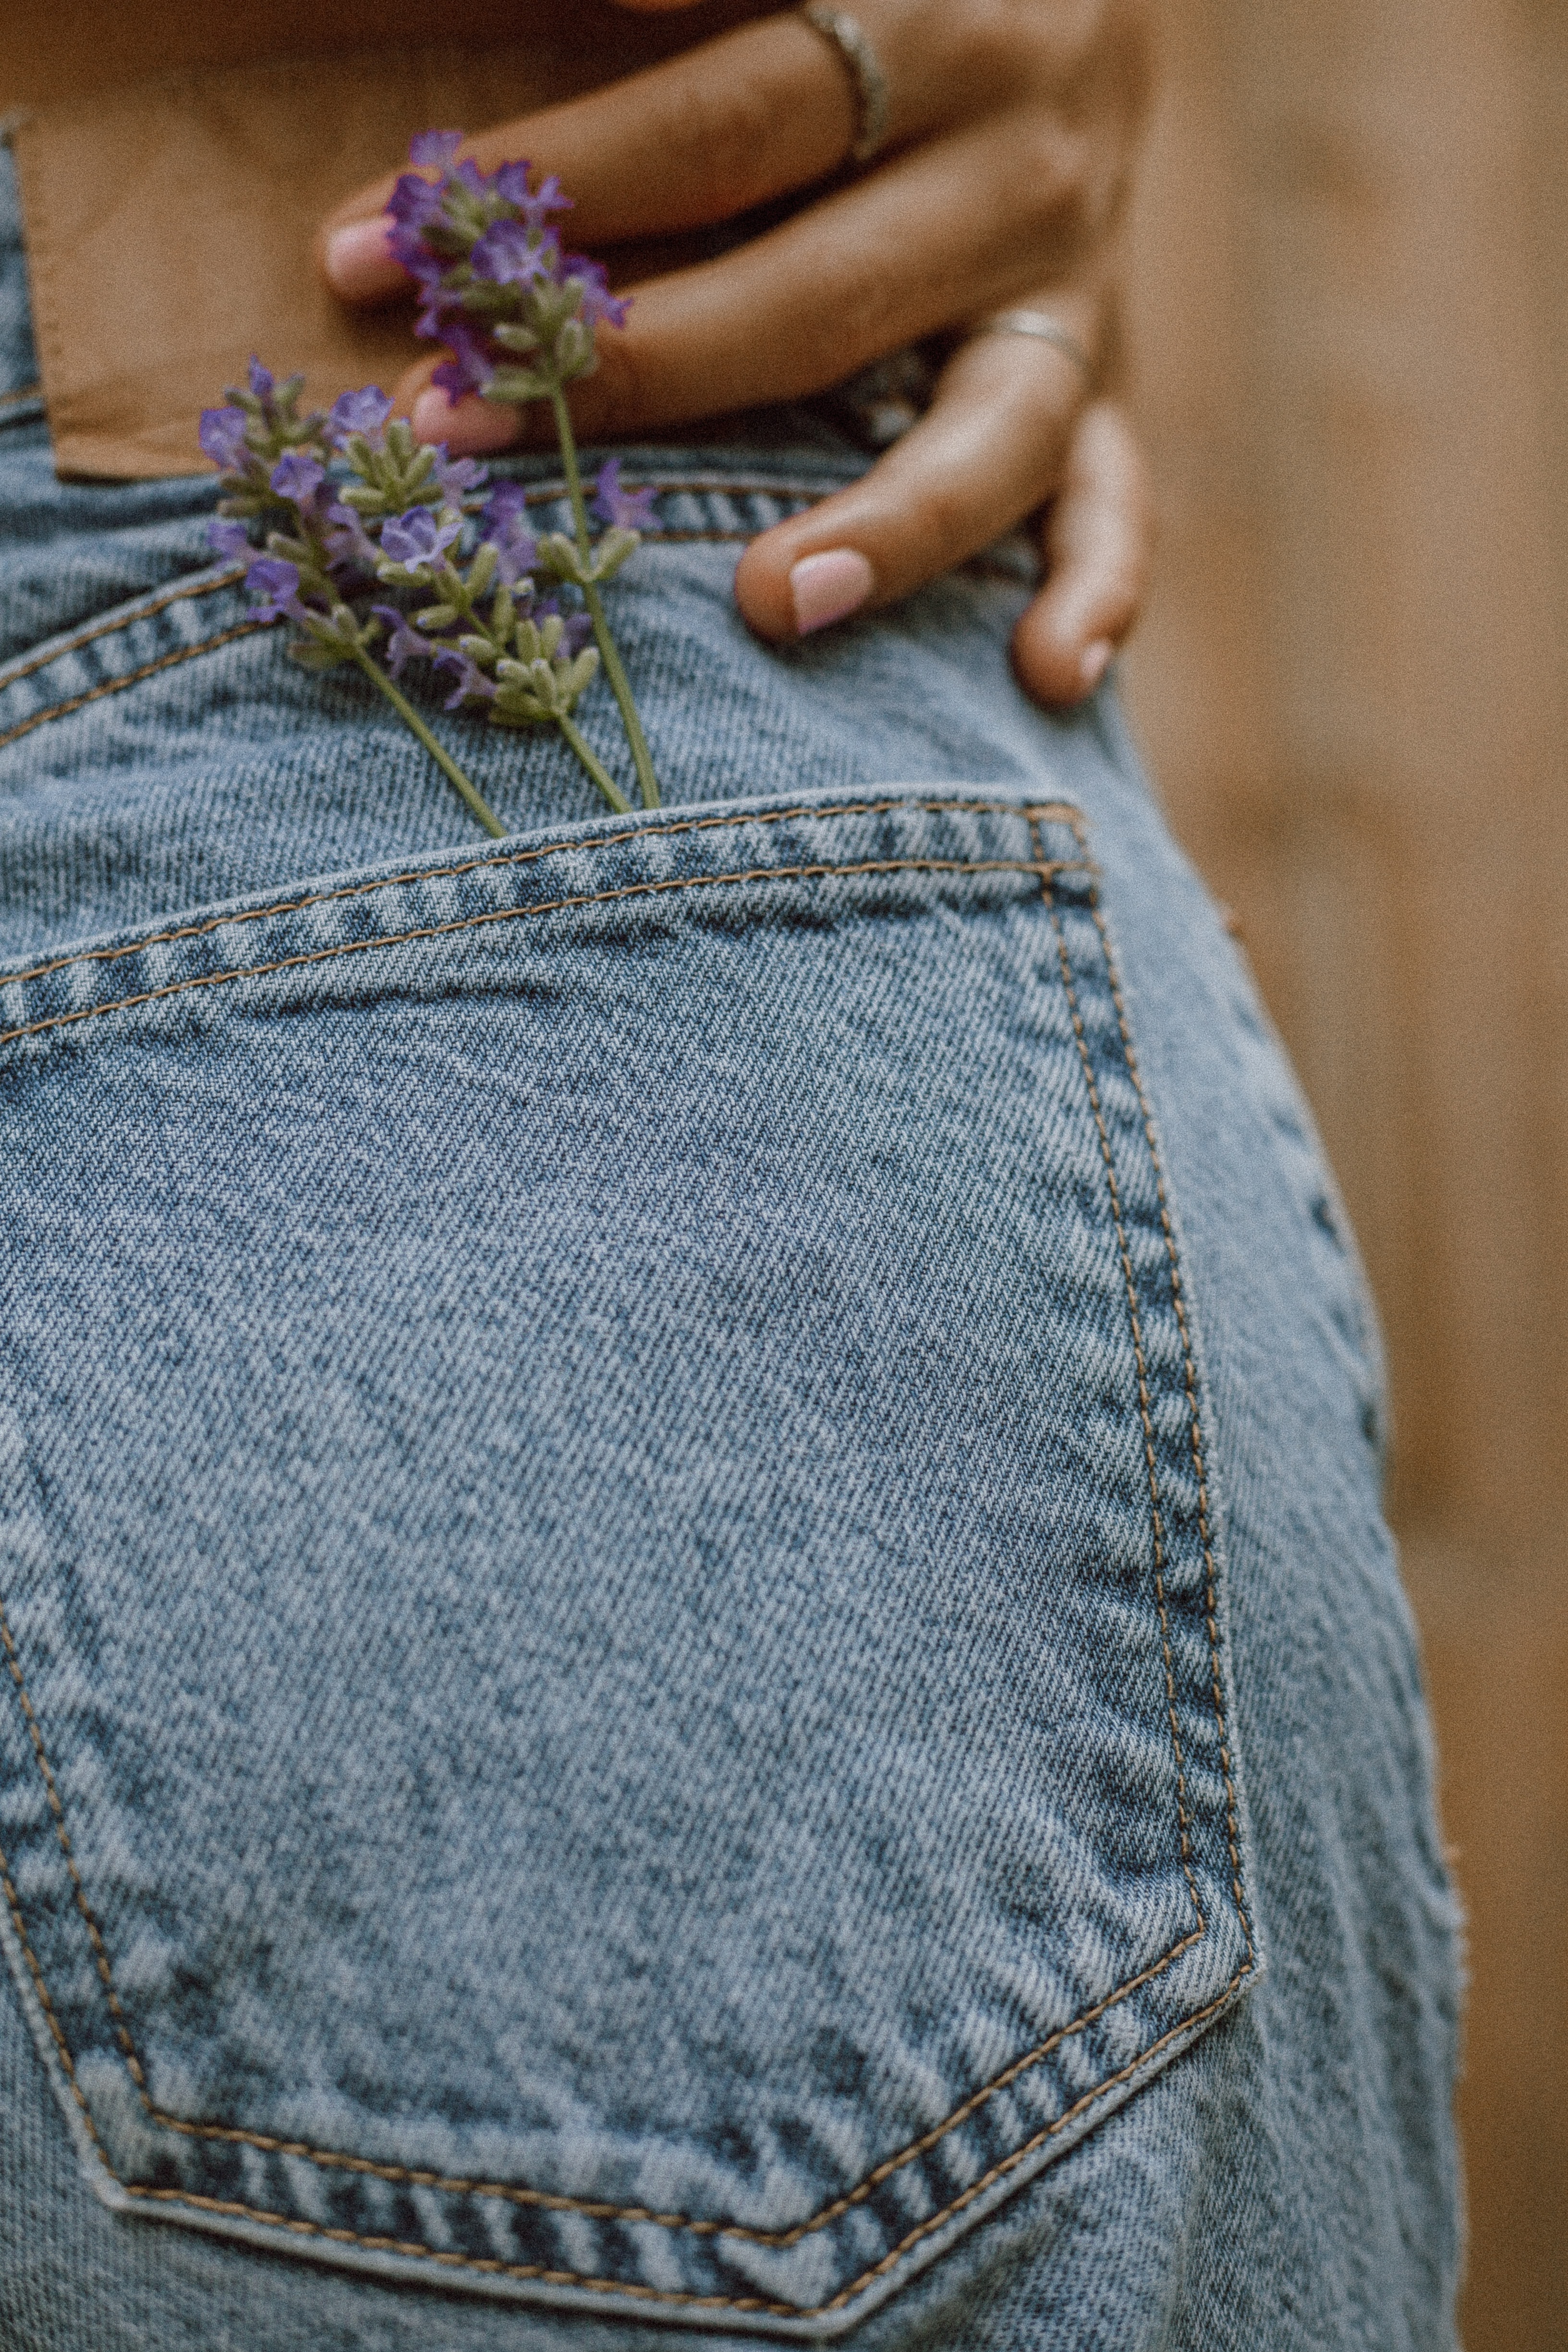 flowers, hand, miscellanea, miscellaneous, ring, jeans, pocket